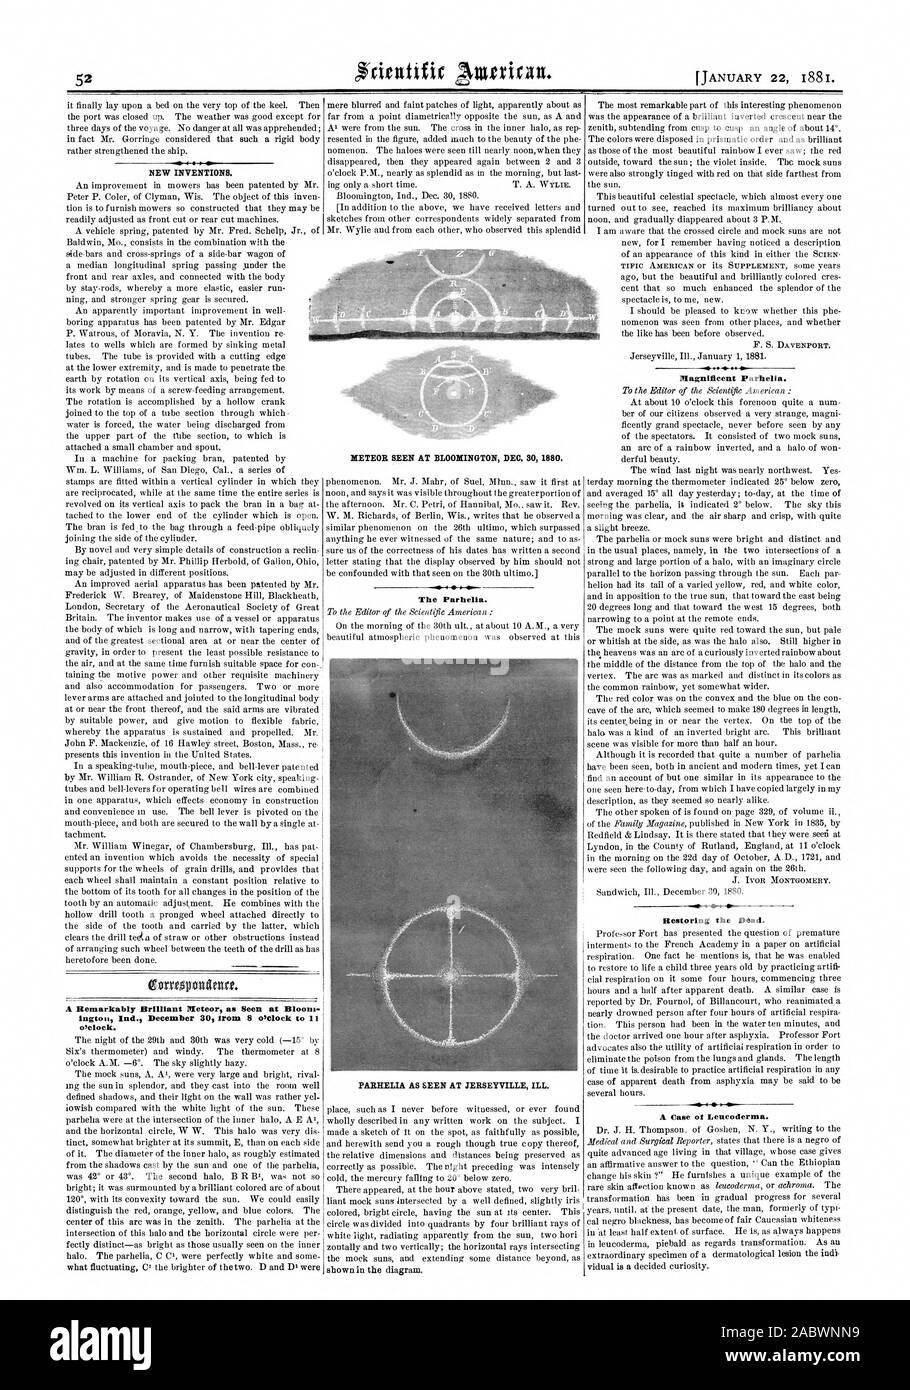 A Remarkably Brilliant Meteor as Seen at Bloom ington Ind. December 30 from 8 &Clock to  o'clock. The Parhelia. PARHELIA AS SEEN AT JERSEYVILLE ILL. Magnificent Parhelia. Restoring the Dead. -of I  -s A Case of Lencoderma. METEOR SEEN AT BLOOMINGTON DEC. 30 1880., scientific american, 1881-01-22 Stock Photo